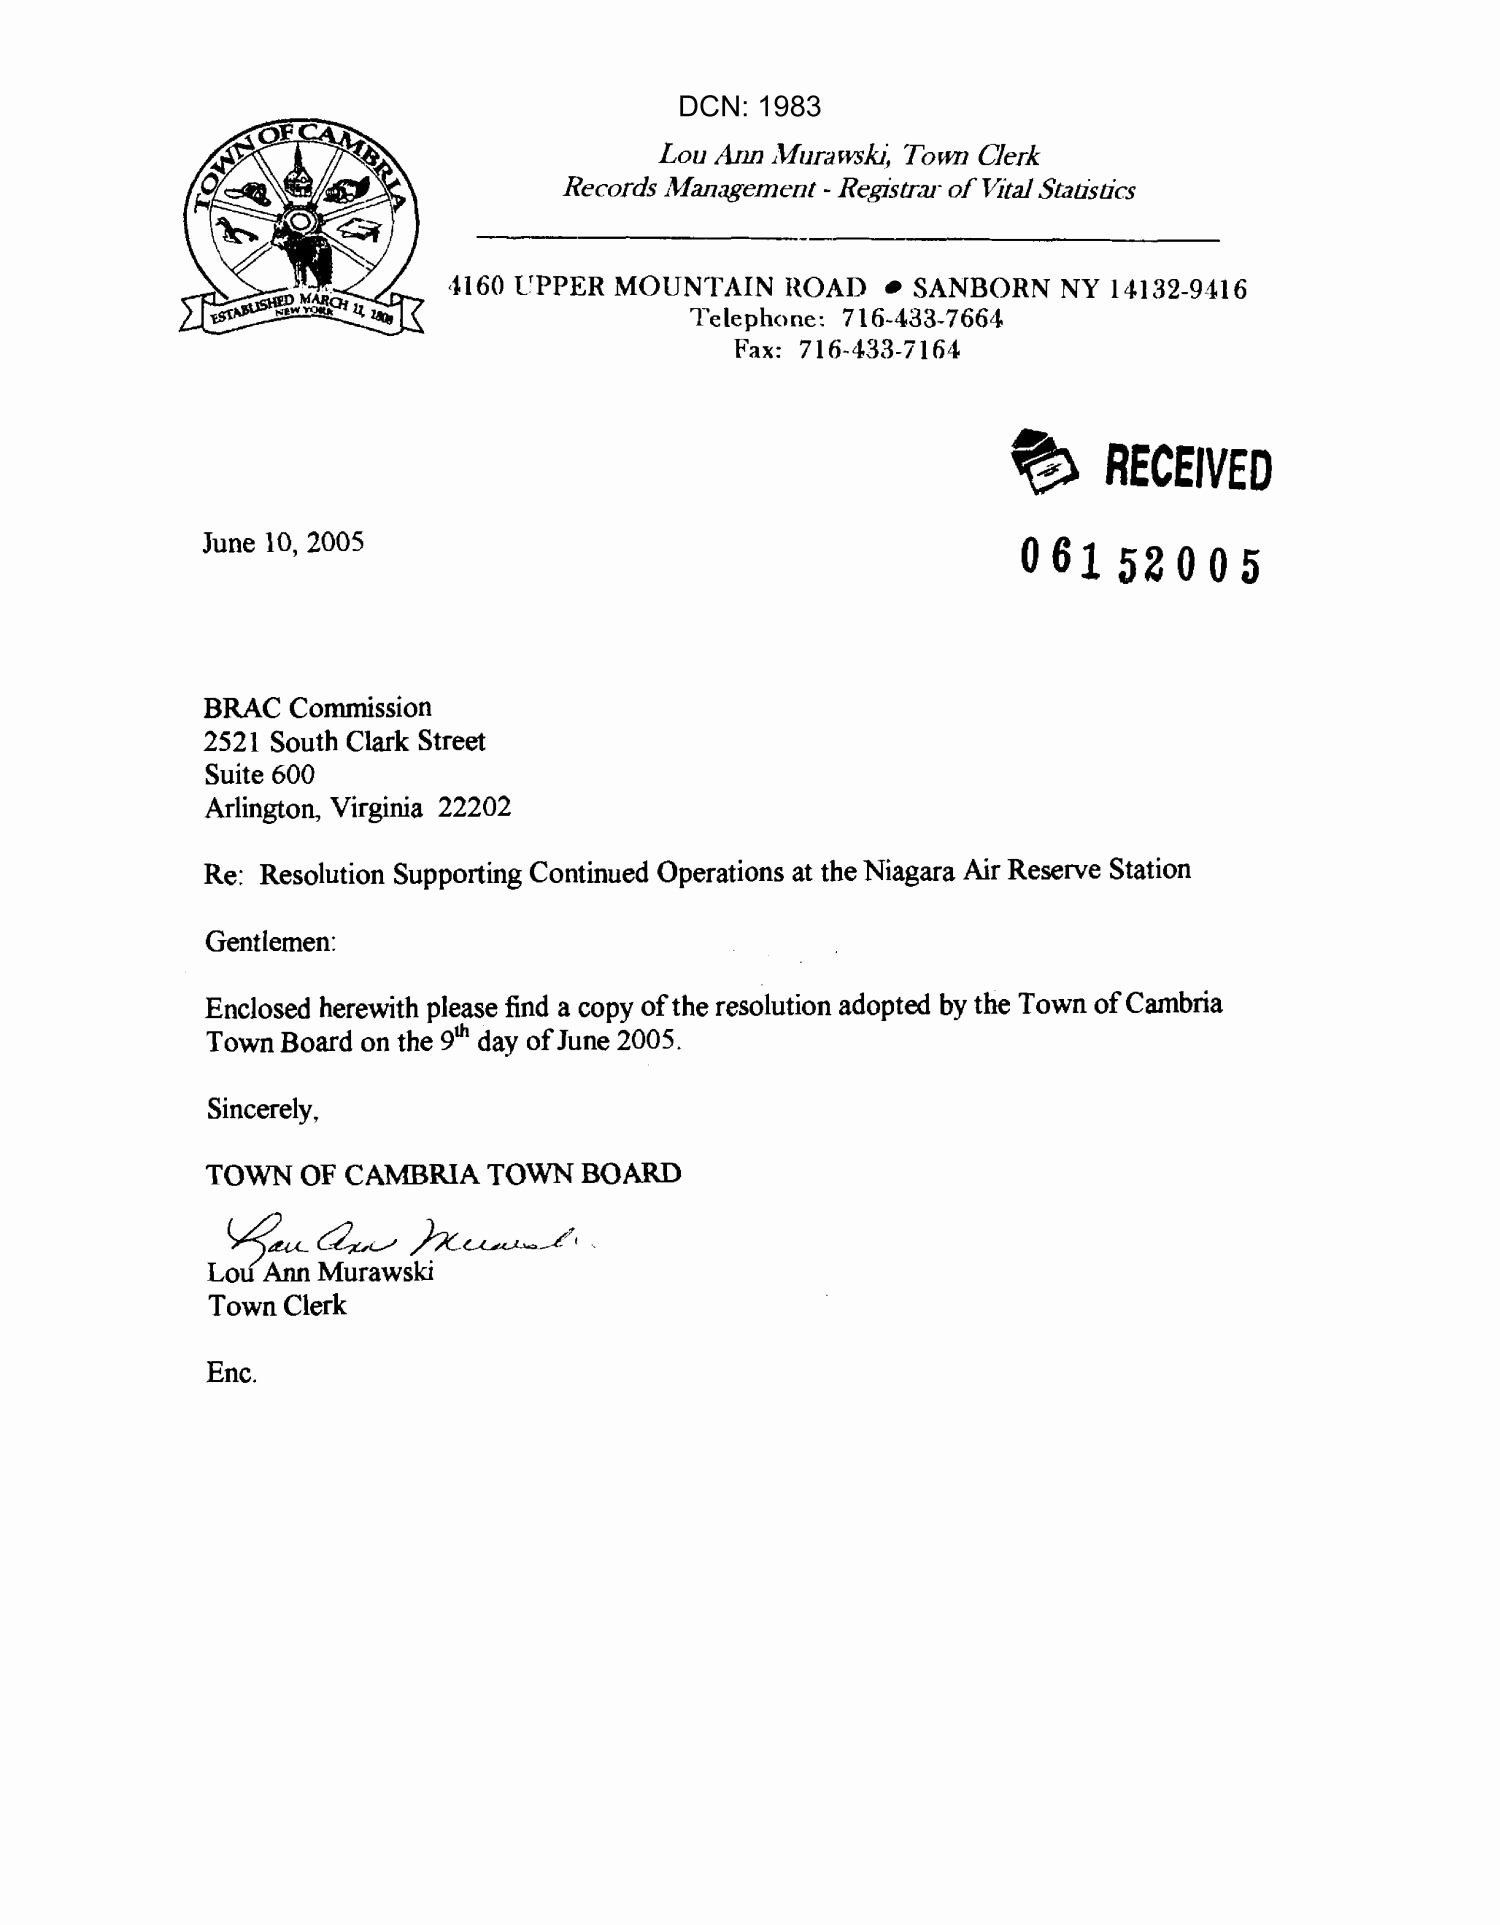 Board Of Directors Resolution Template Fresh Letter and Resolution From town Of Cambria Board New York